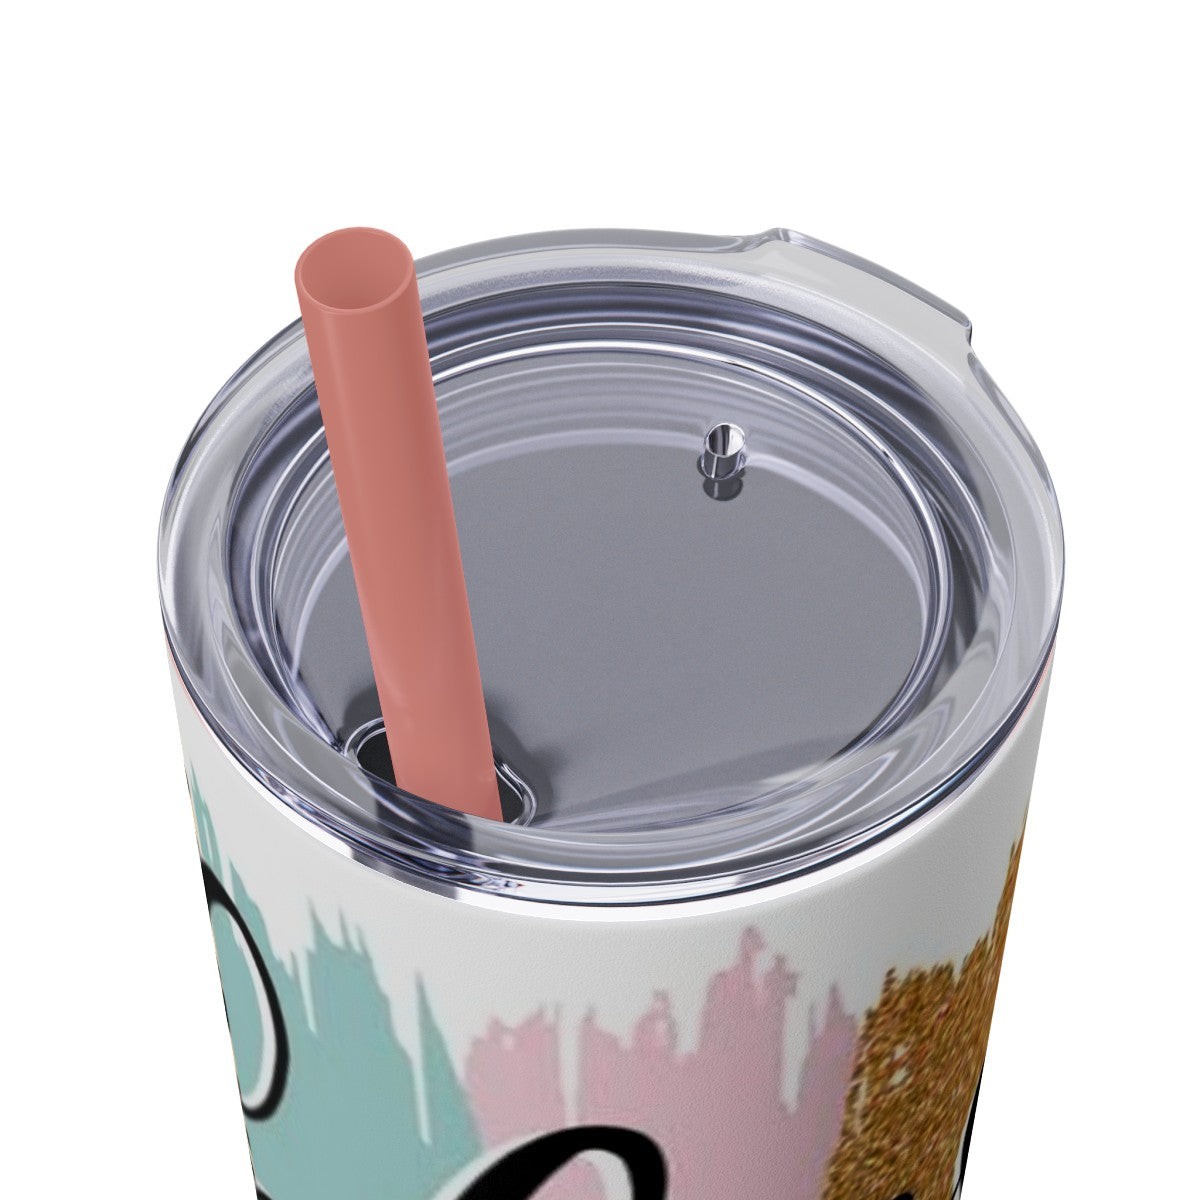 Get trendy with Blessed Teacher Skinny Tumbler with Straw, 20oz -  available at Good Gift Company. Grab yours for $44.20 today!